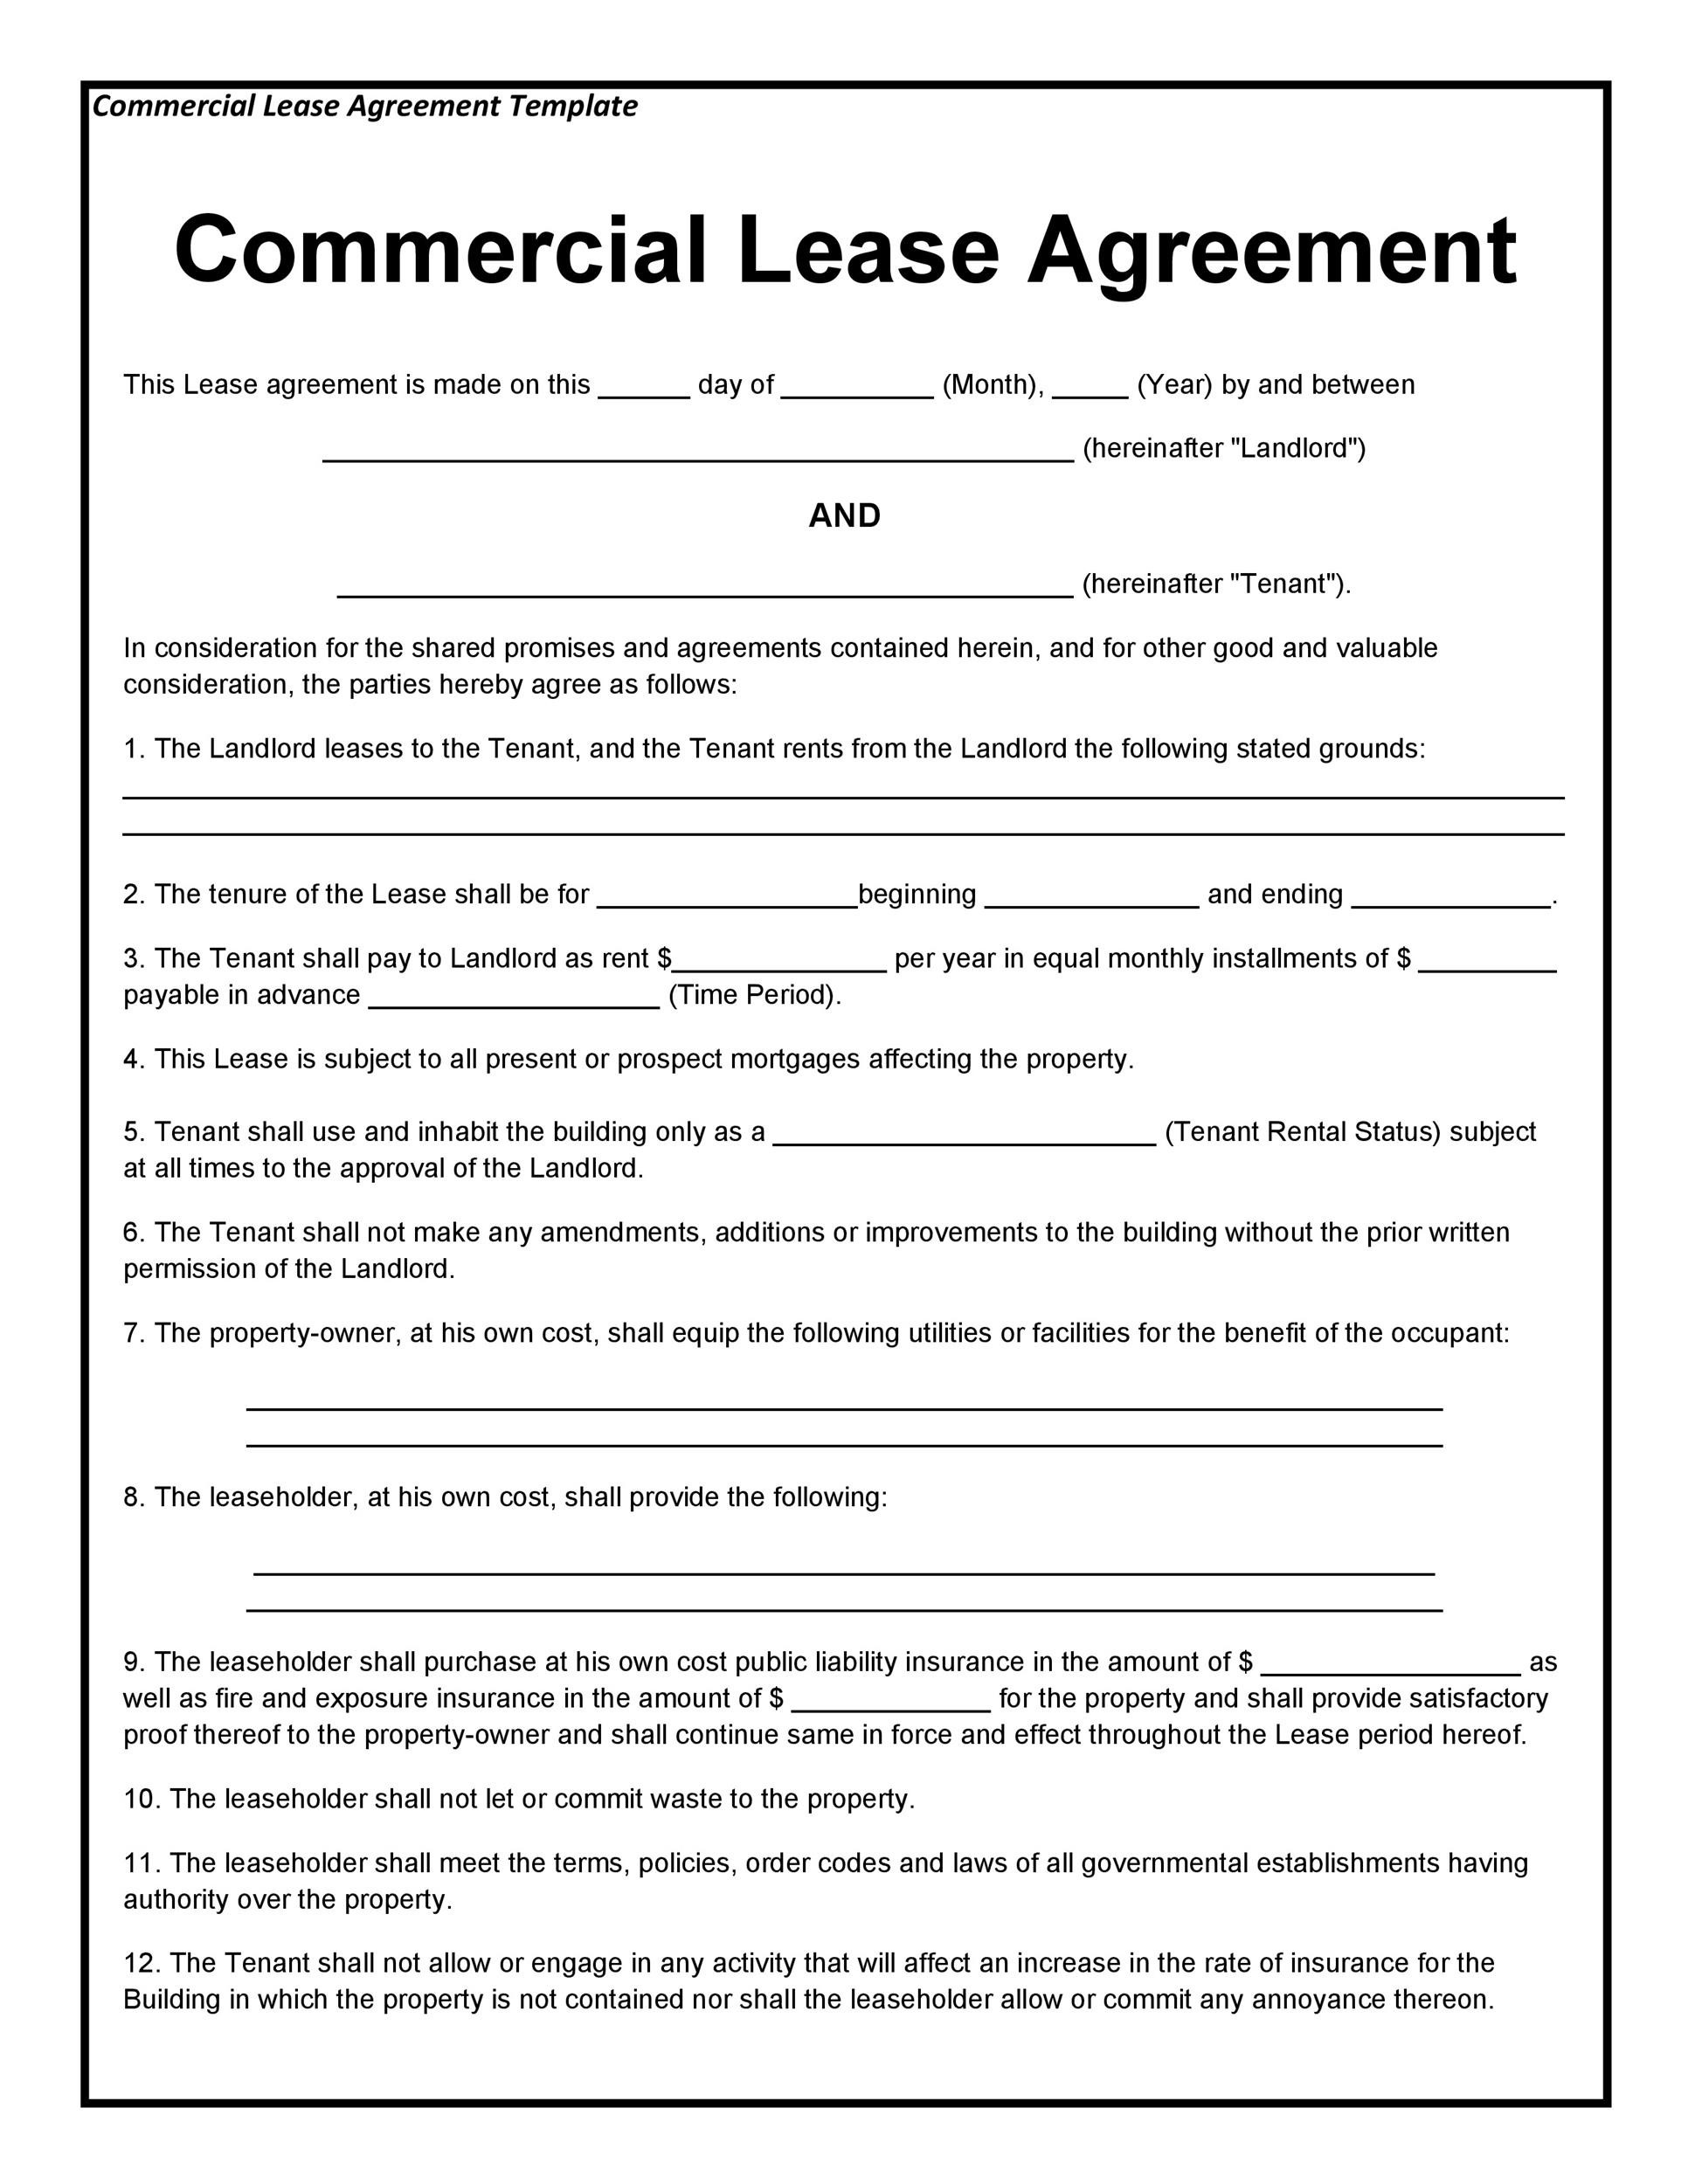 printable-copies-of-lease-agreements-printable-lease-agreement